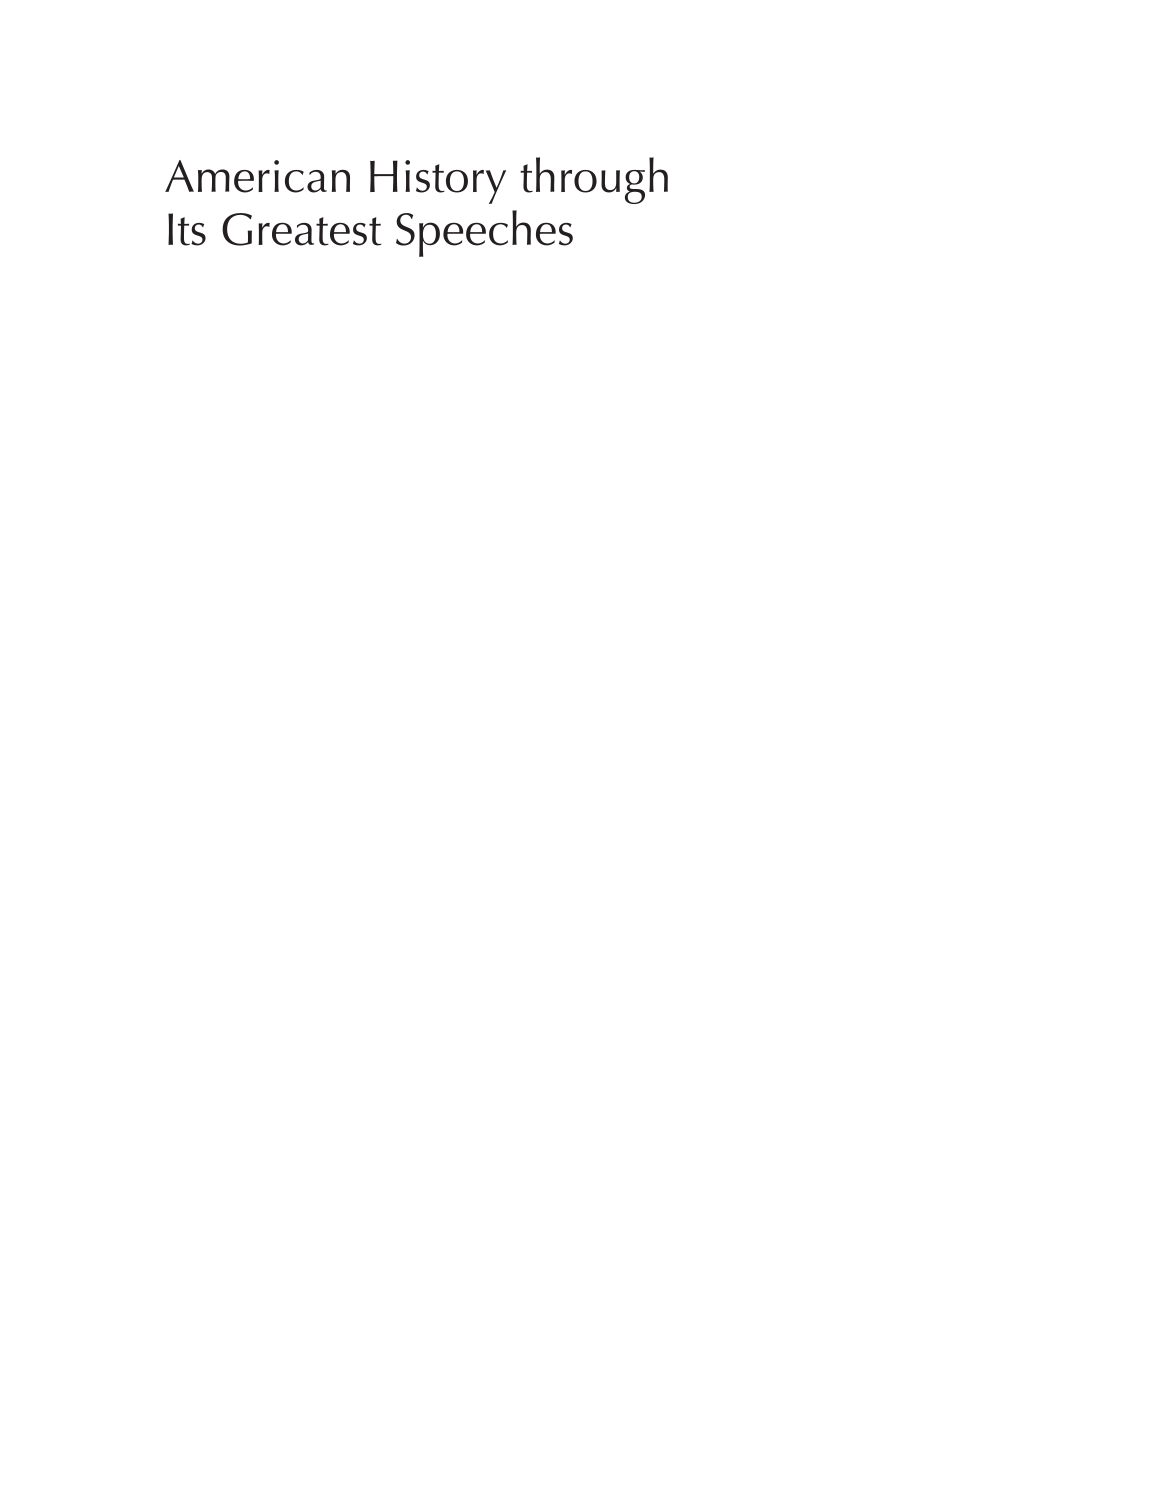 American History through its Greatest Speeches: A Documentary History of the United States [3 volumes] page 1:i